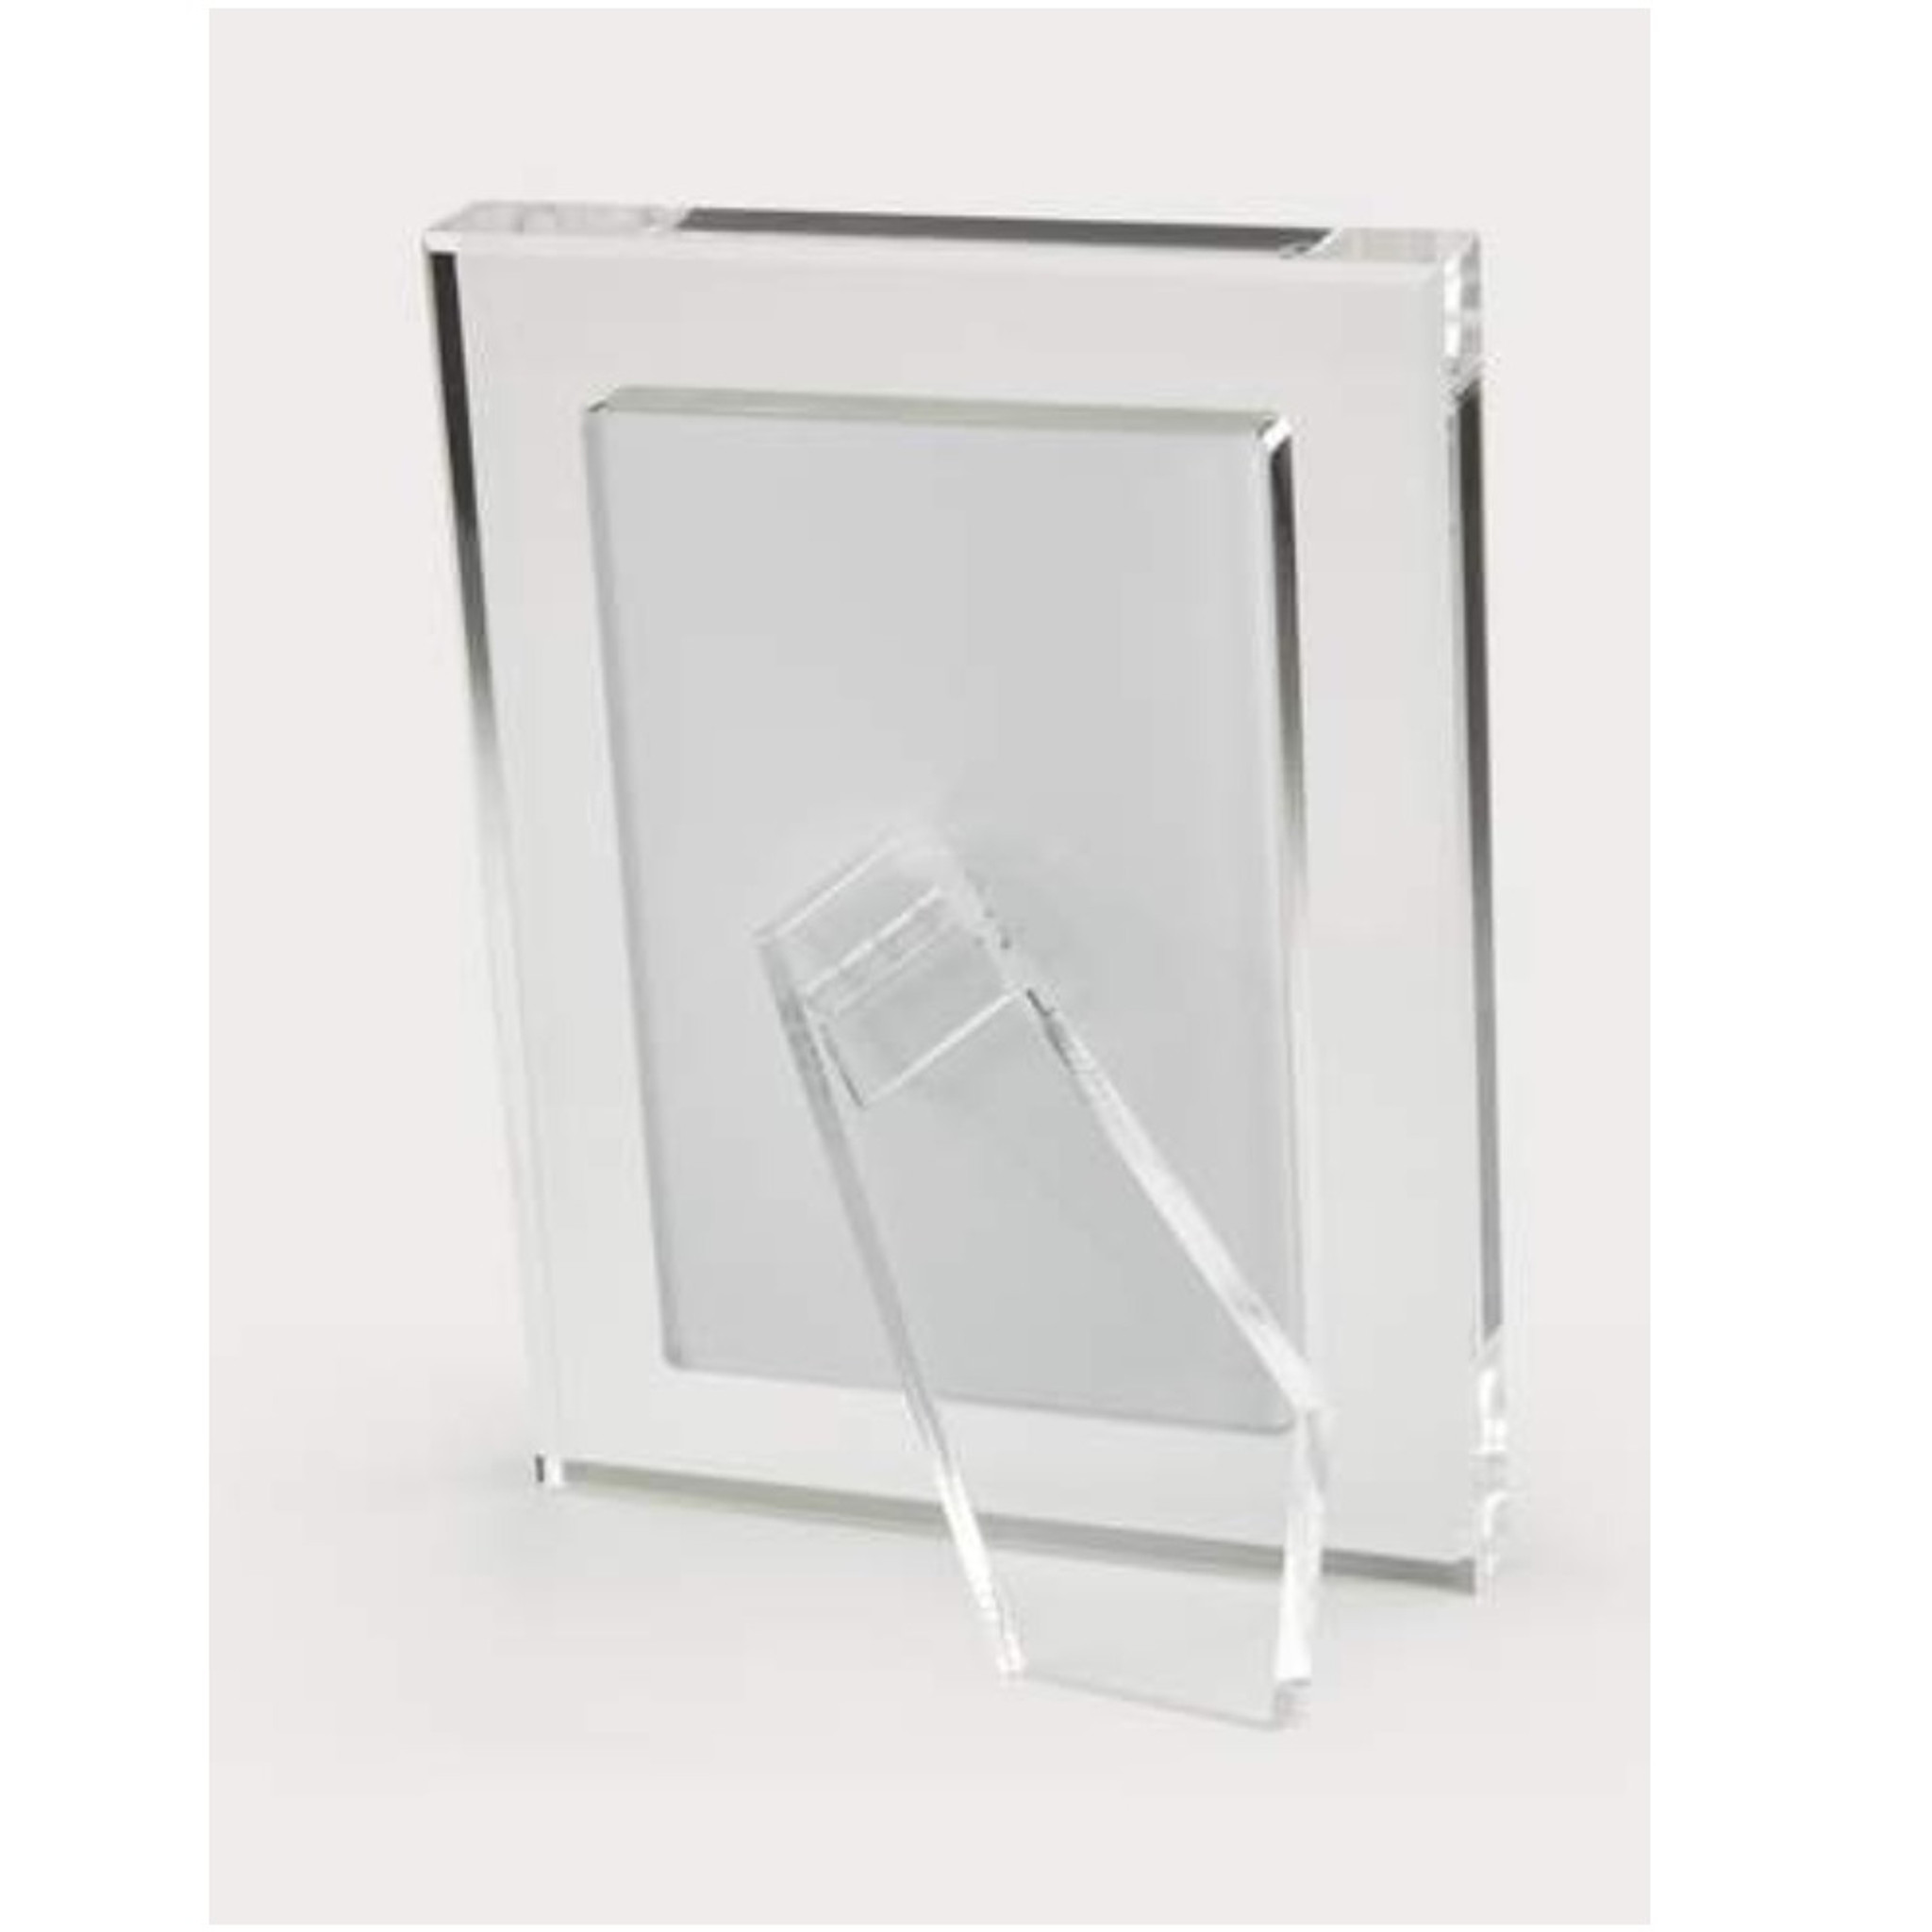  HA194CL tizo modern lucite acrylic clear border easel photo picture frame